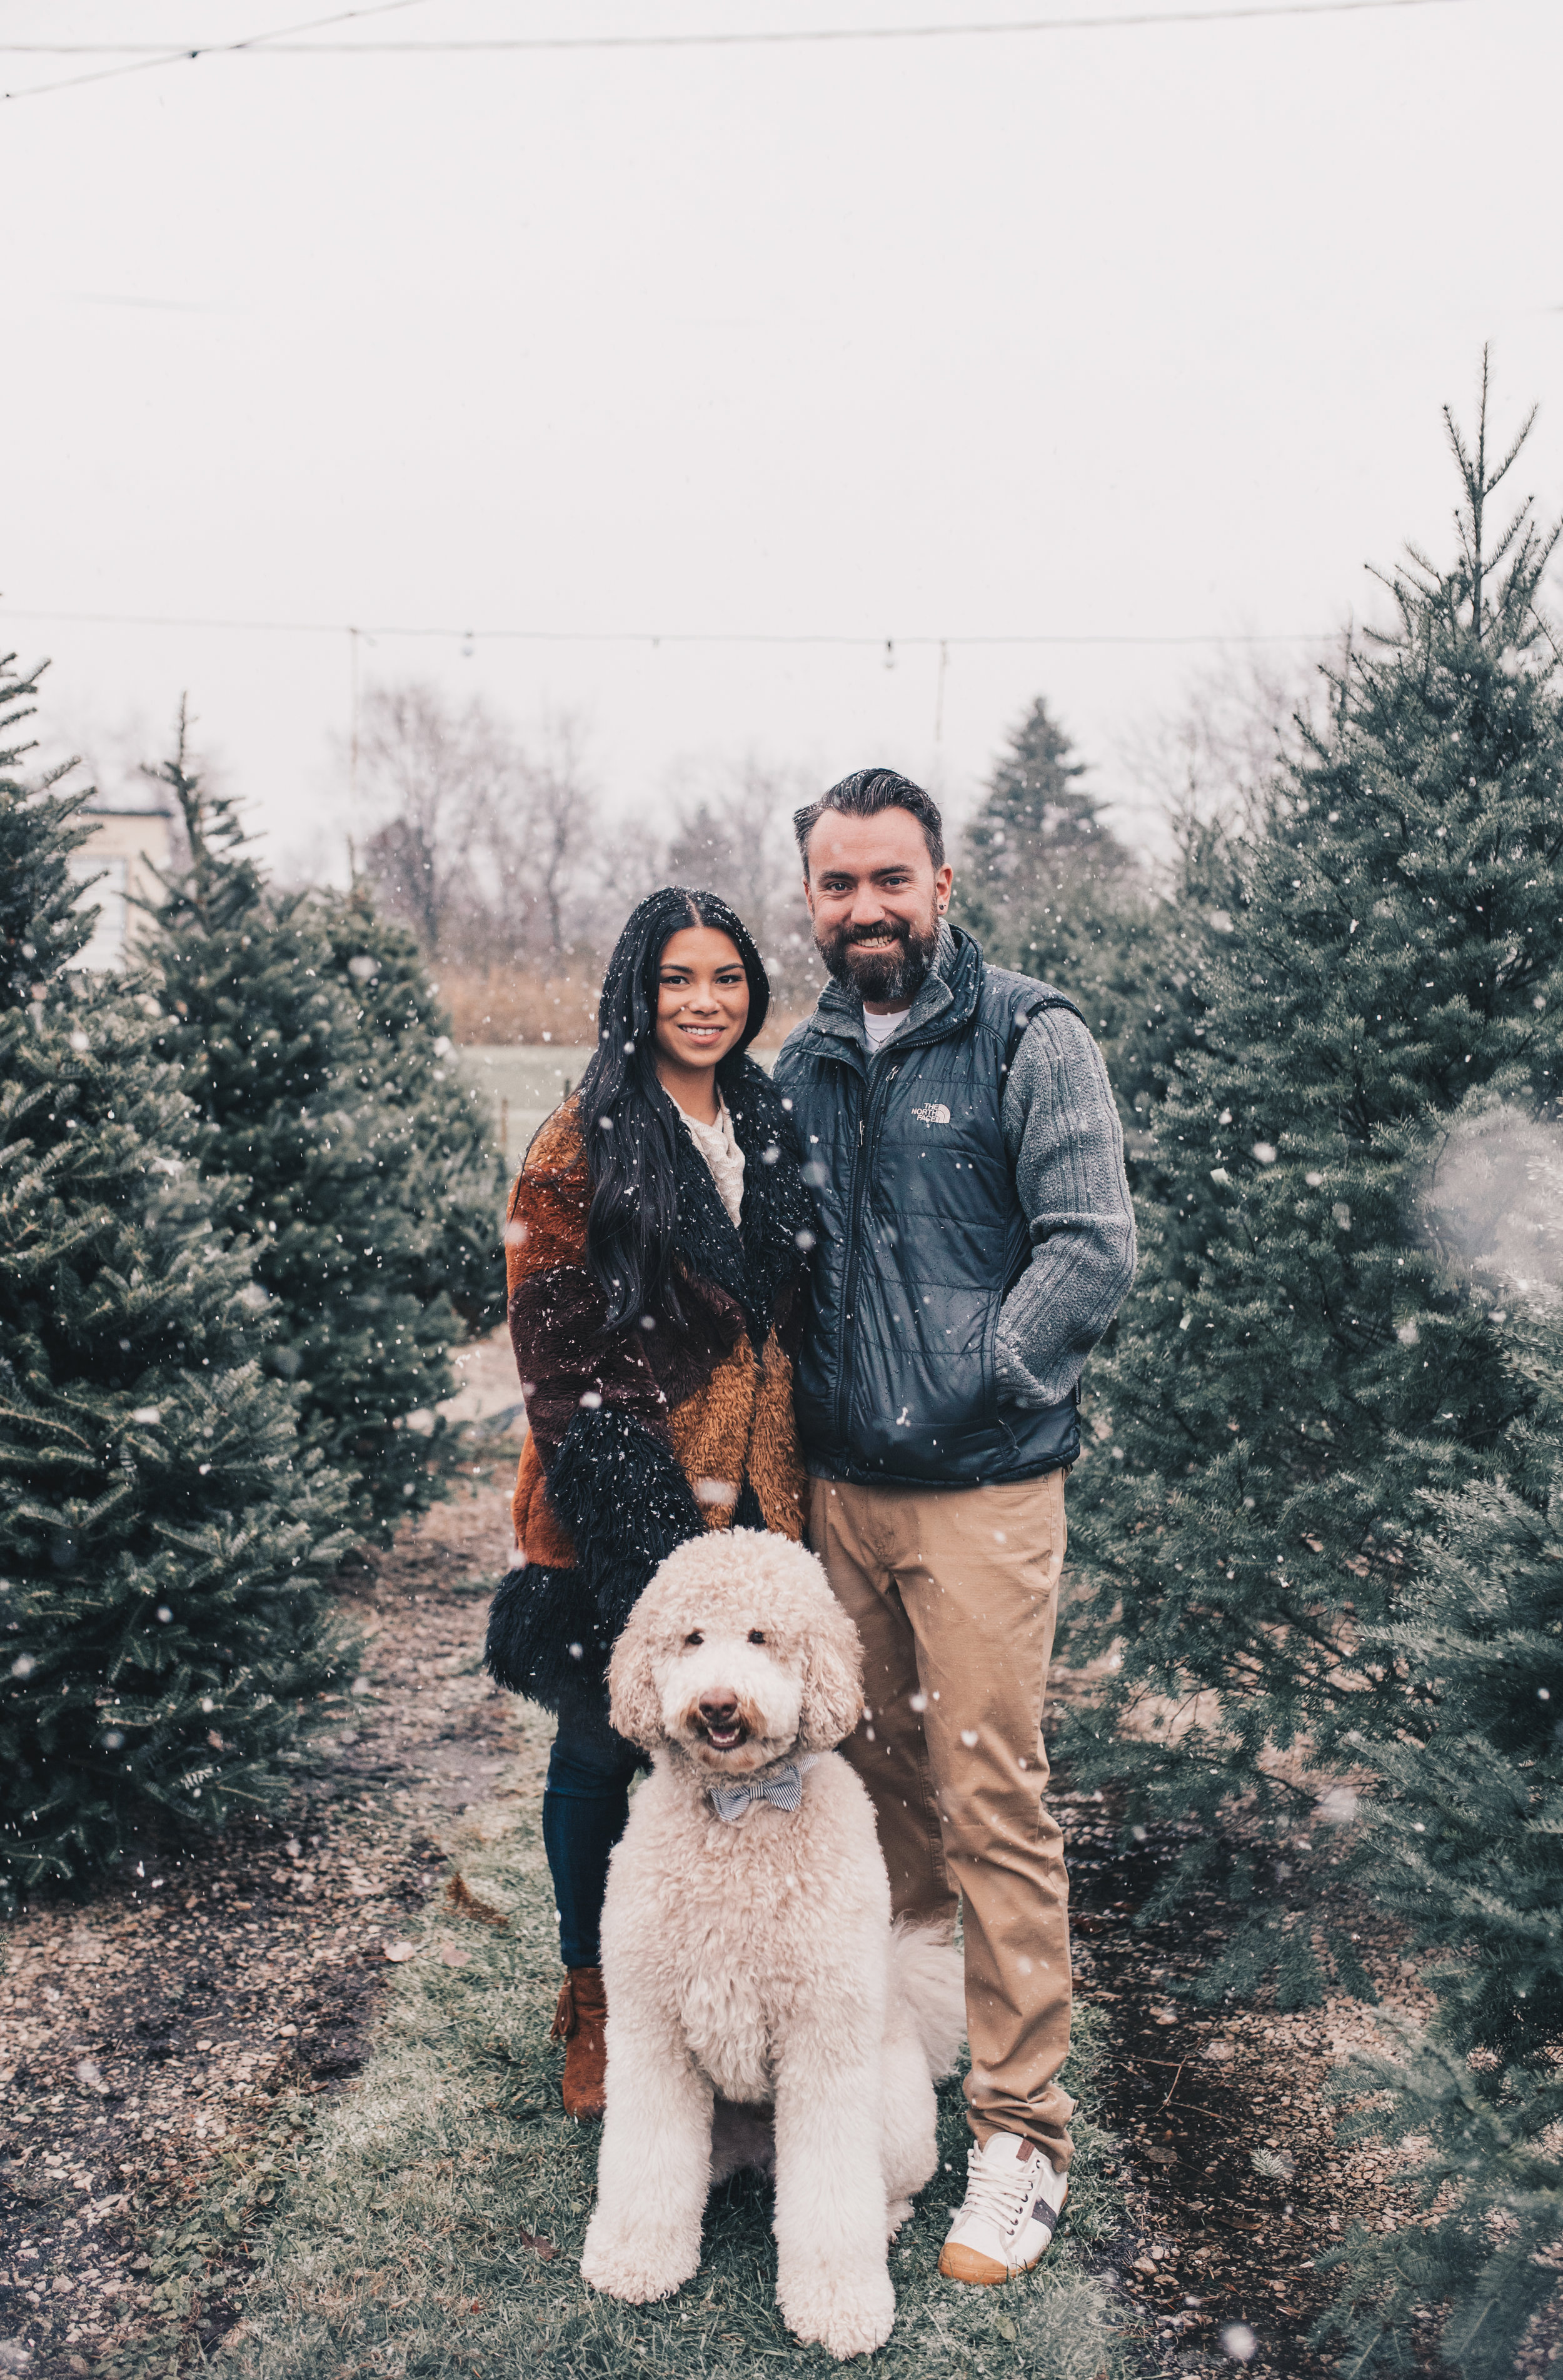 Winter Couples Photography, Winter Engagement Photography, Winter Wonderland Couples Photos, Illinois Couples Photographer 